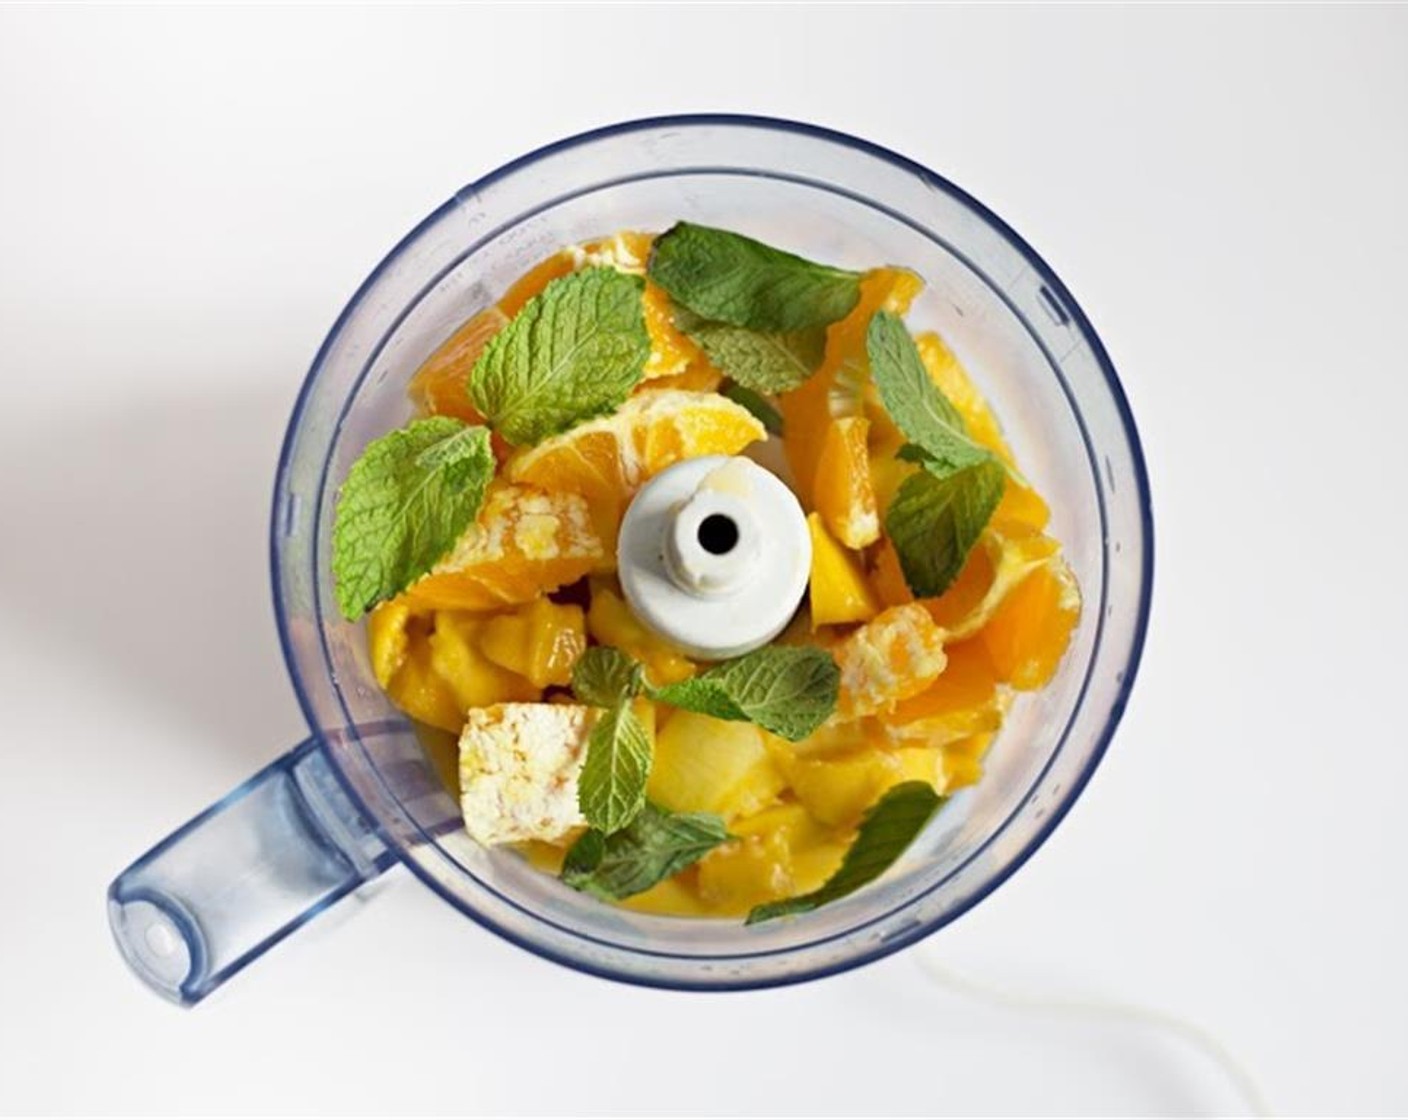 step 1 Blend Fresh Mango Chunks (3 cups), Orange (1 cup), Fresh Mint (1 1/2 sprigs), and Prosecco Wine (to taste) in a food processor or blender.